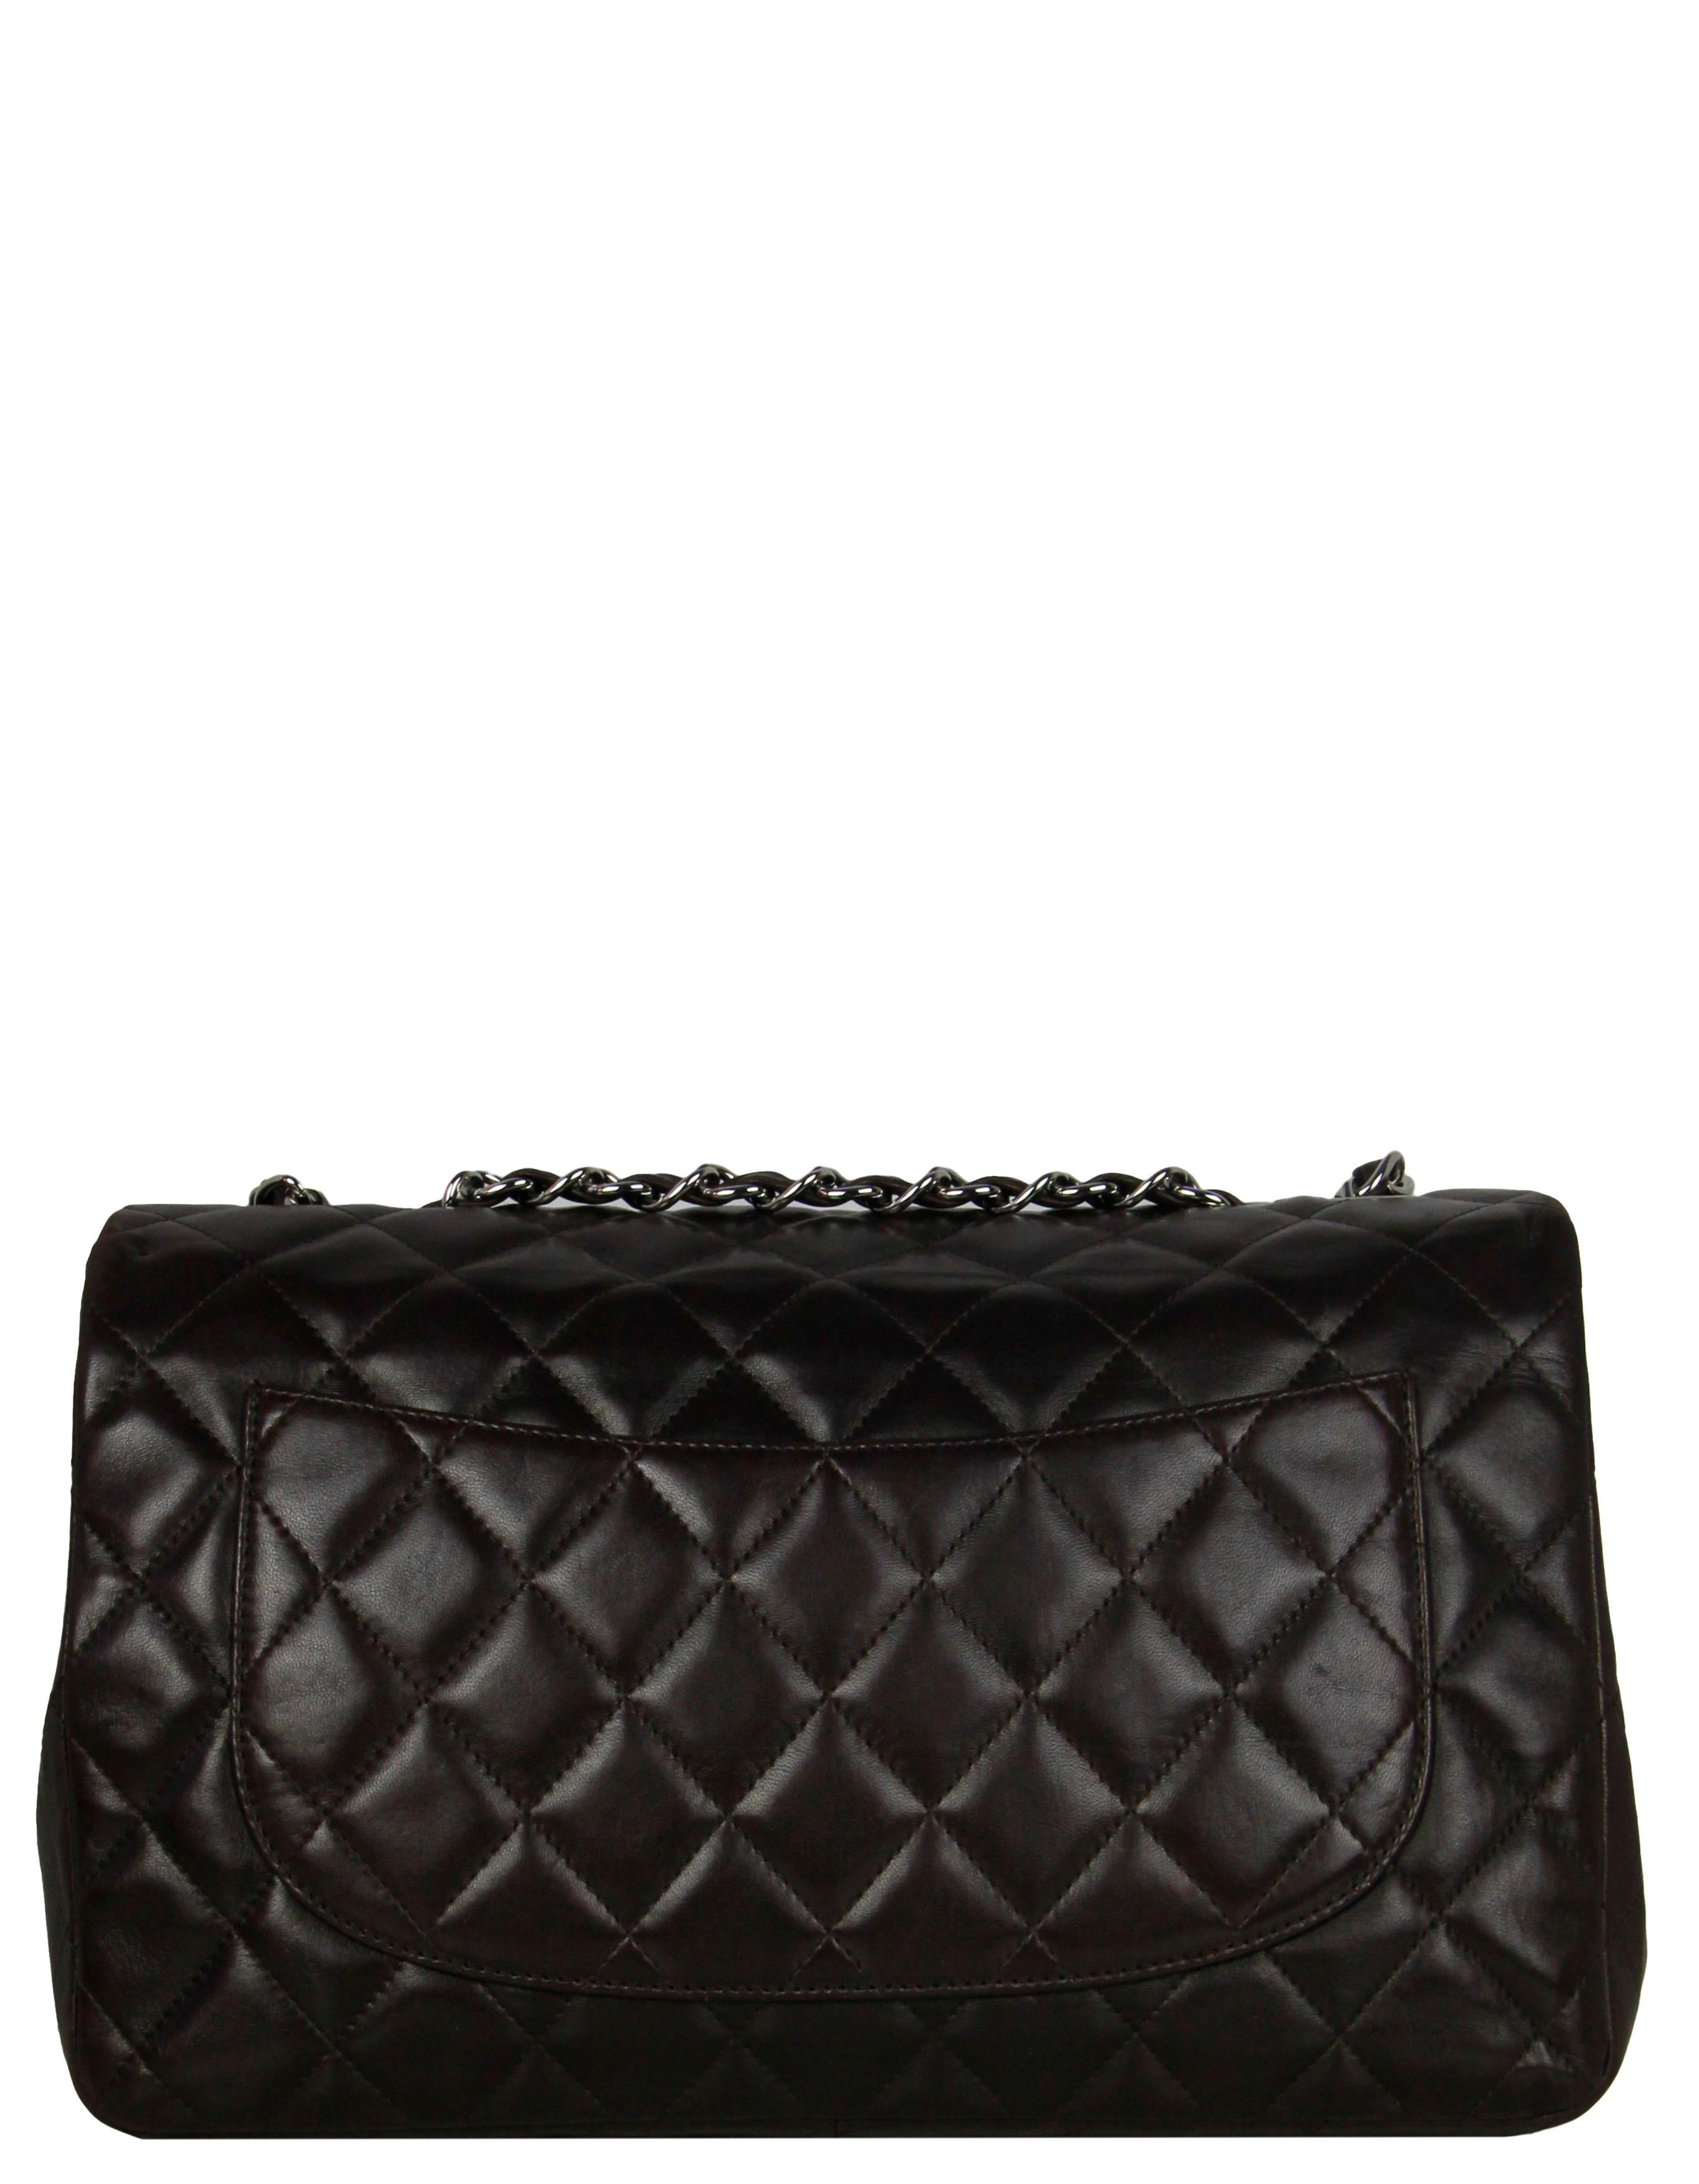 Chanel Brown Lambskin Quilted Single Flap Jumbo Classic Bag In Good Condition For Sale In New York, NY